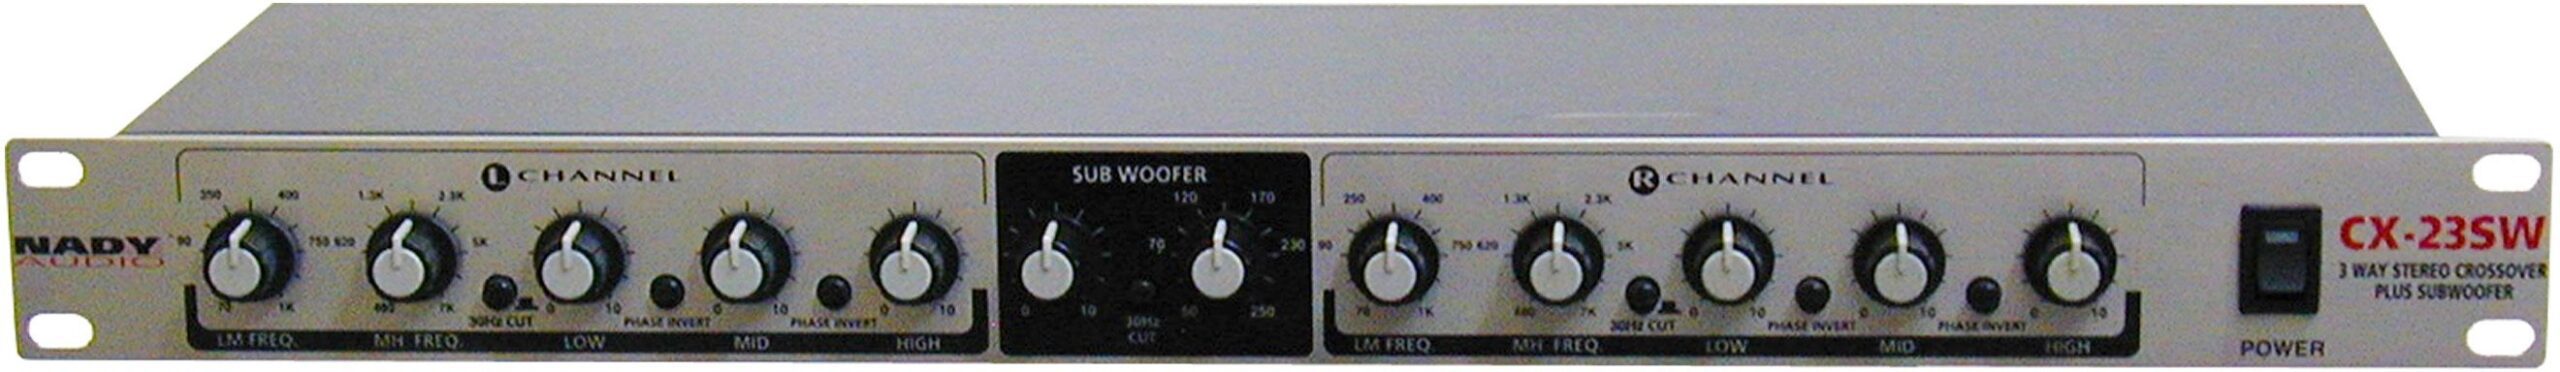 The Nady CX23SW 3-Way Stereo Crossover gives you options for virtually all live sound reinforcement amplifier configurations. High slew rate circuitry, over 115dB dynamic range, phase inversion switches, low-cut subsonic filters for low-frequency driver protection, servo-balanced XLR inputs, and shielded internal power supply provide pro functionality anybody can afford.